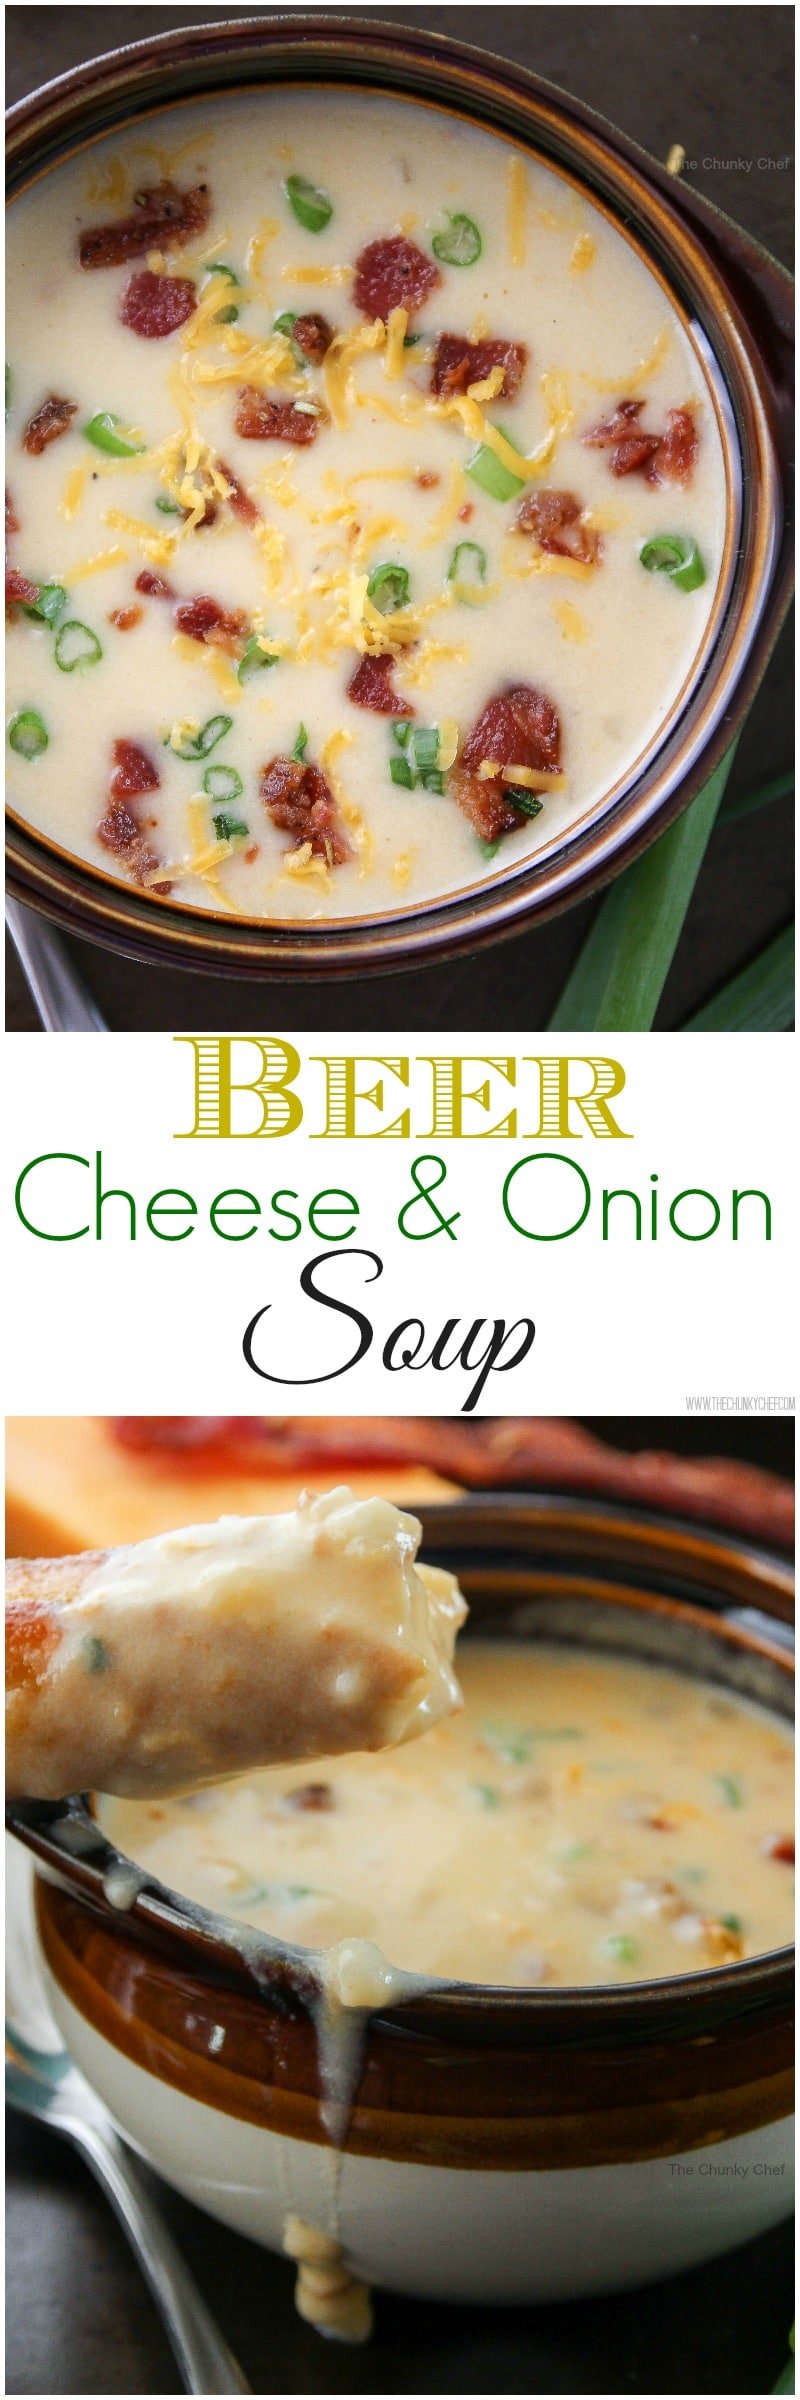 Beer Cheese Soup - You know that amazing beer cheese dip you get at pubs? Now you can make that at home, with the addition of flavorful caramelized onions!